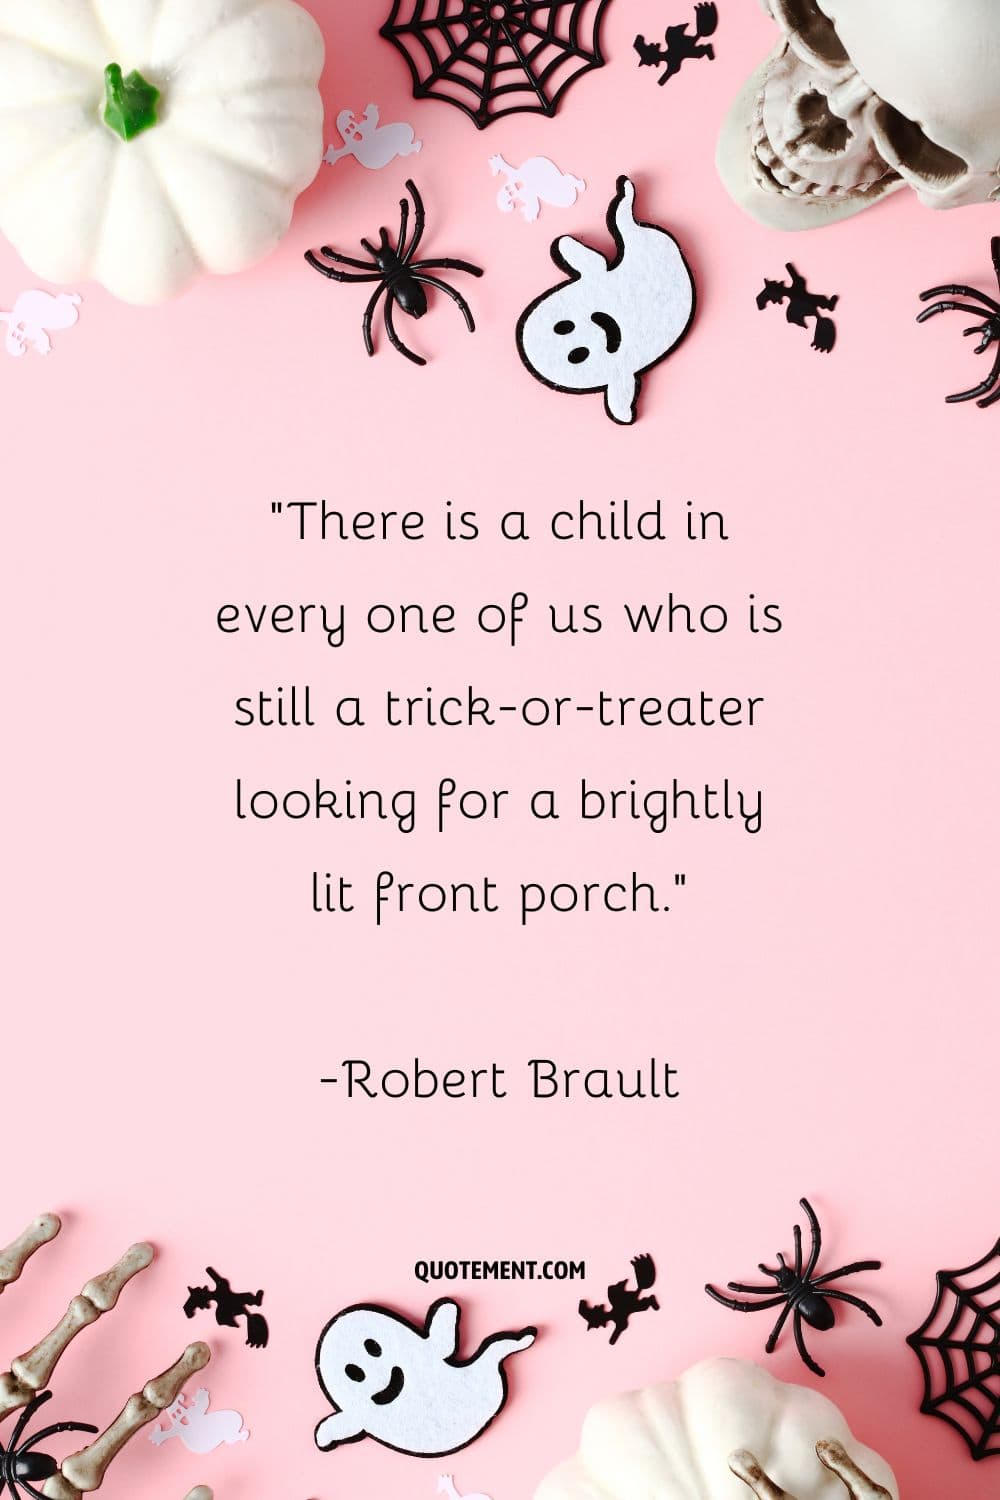 There is a child in every one of us who is still a trick-or-treater looking for a brightly lit front porch